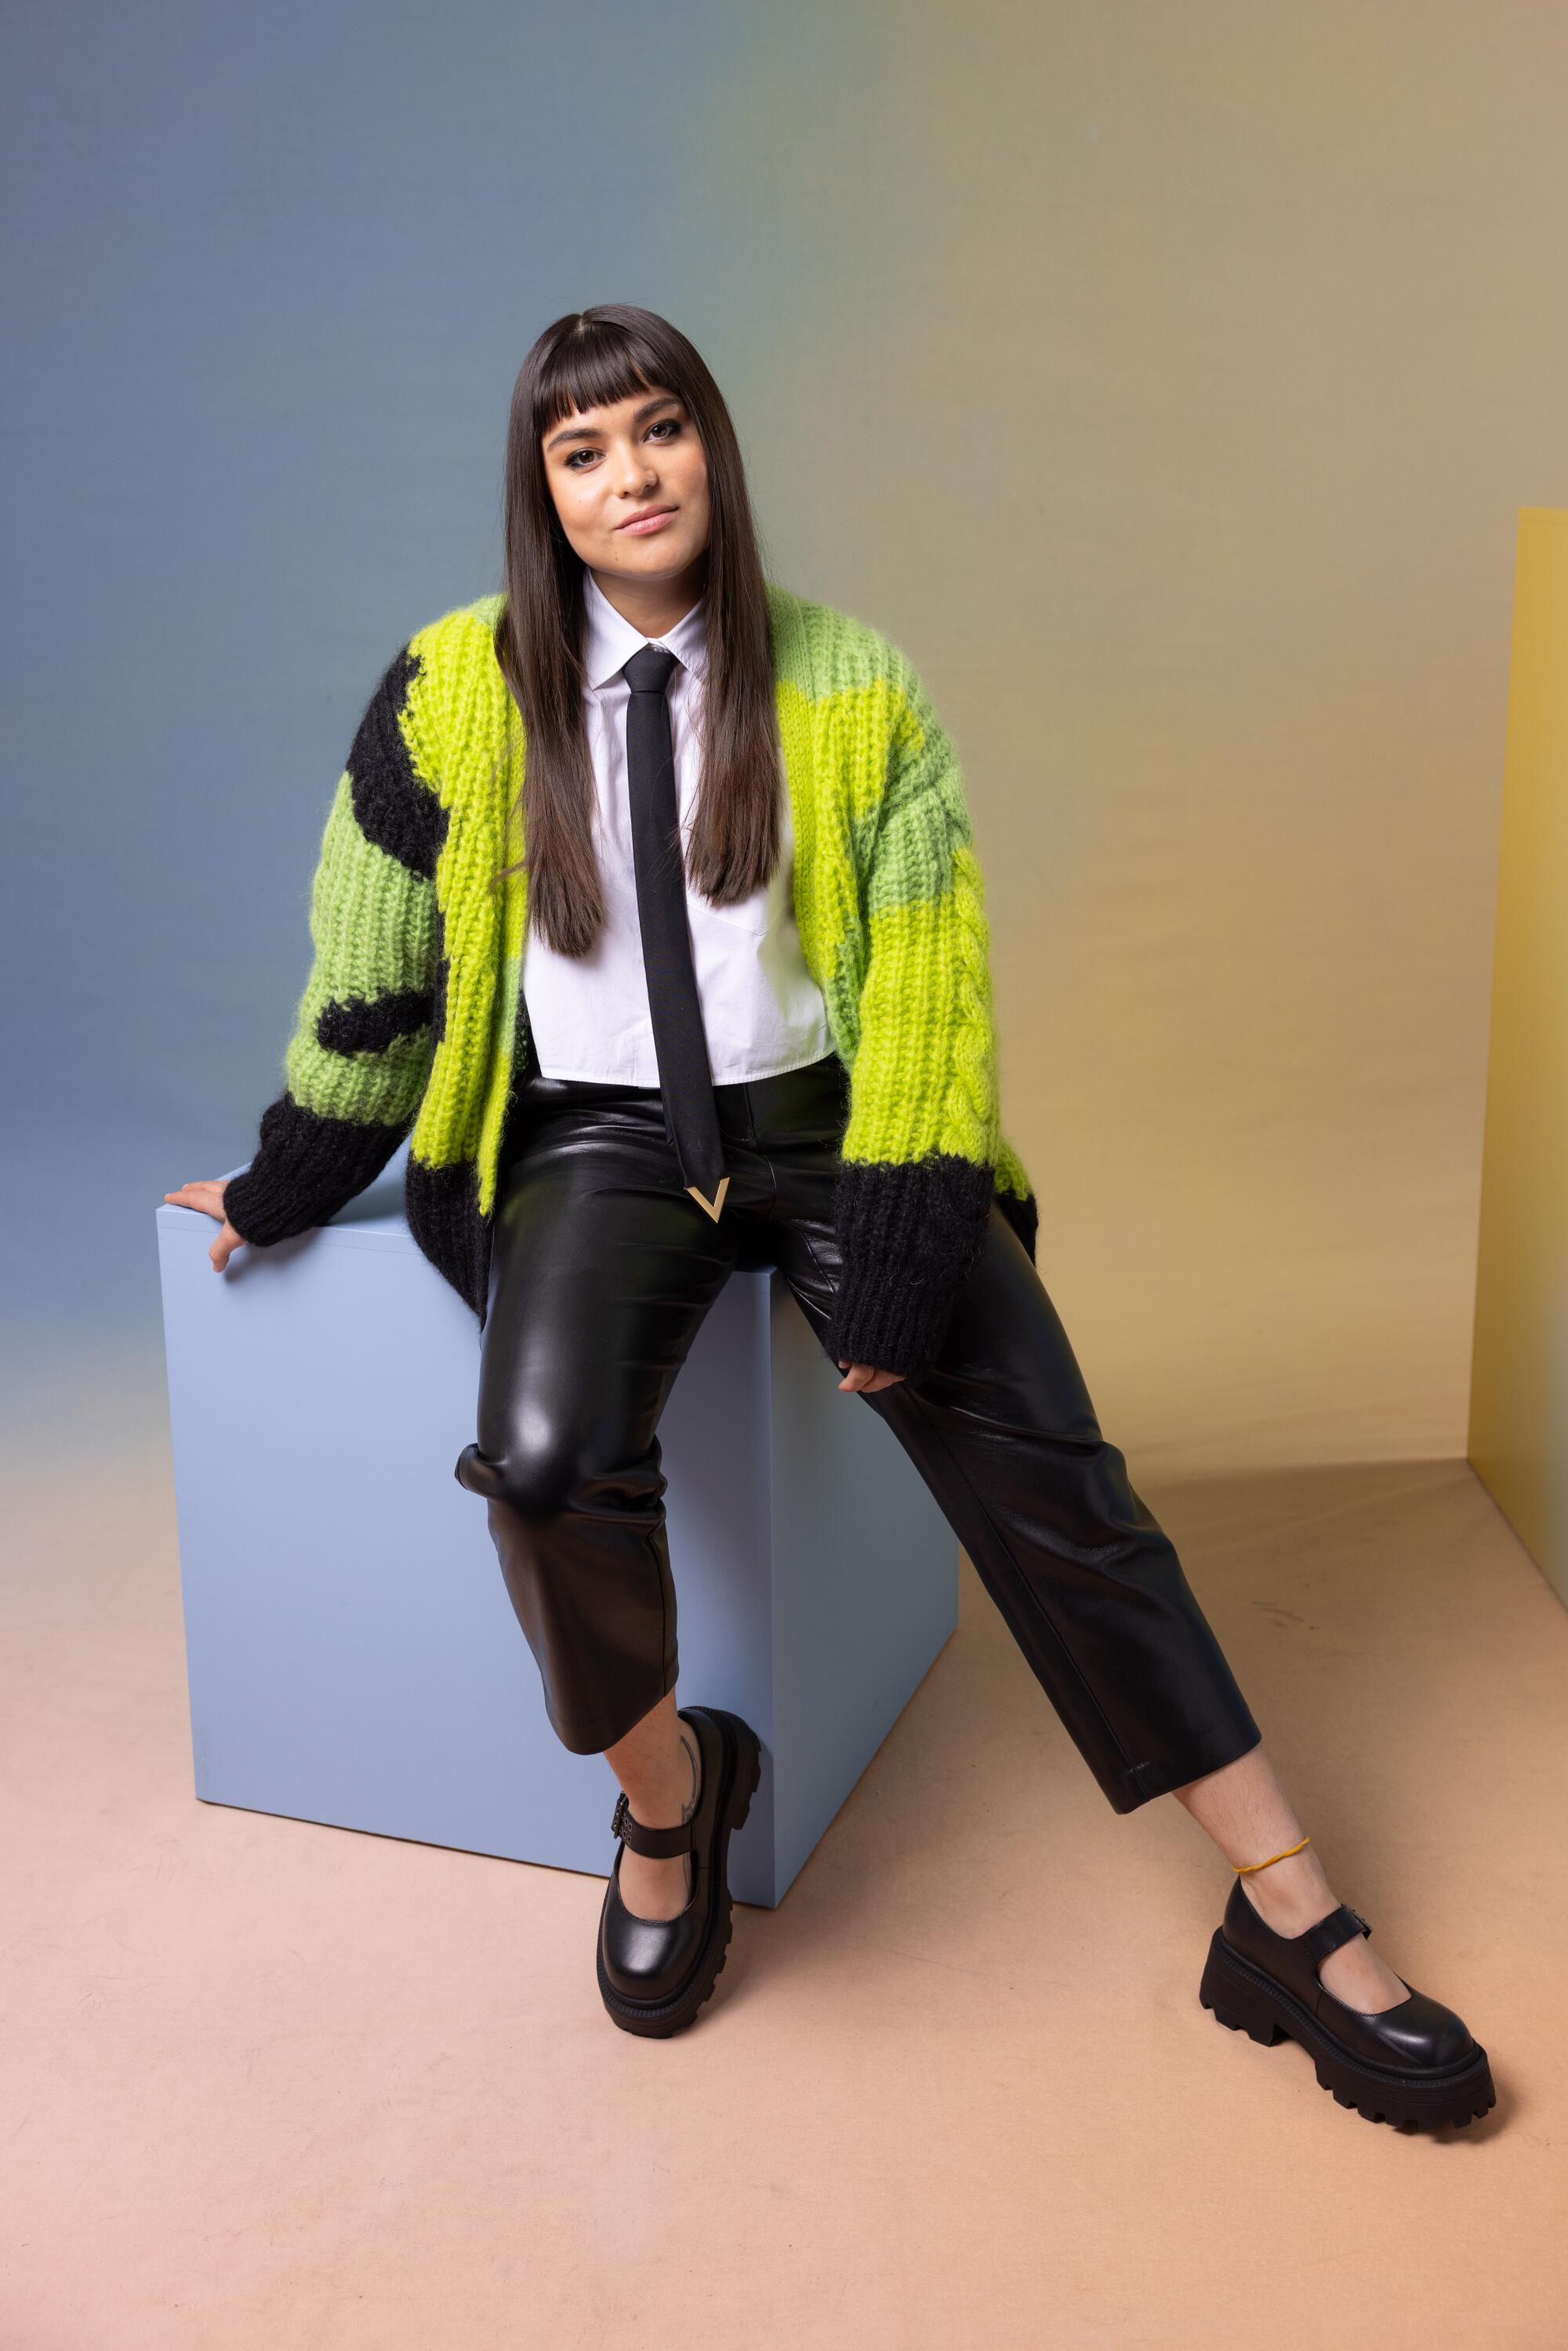 Devery Jacobs wears a black and yellow sweater and black pants while sitting on a cube.